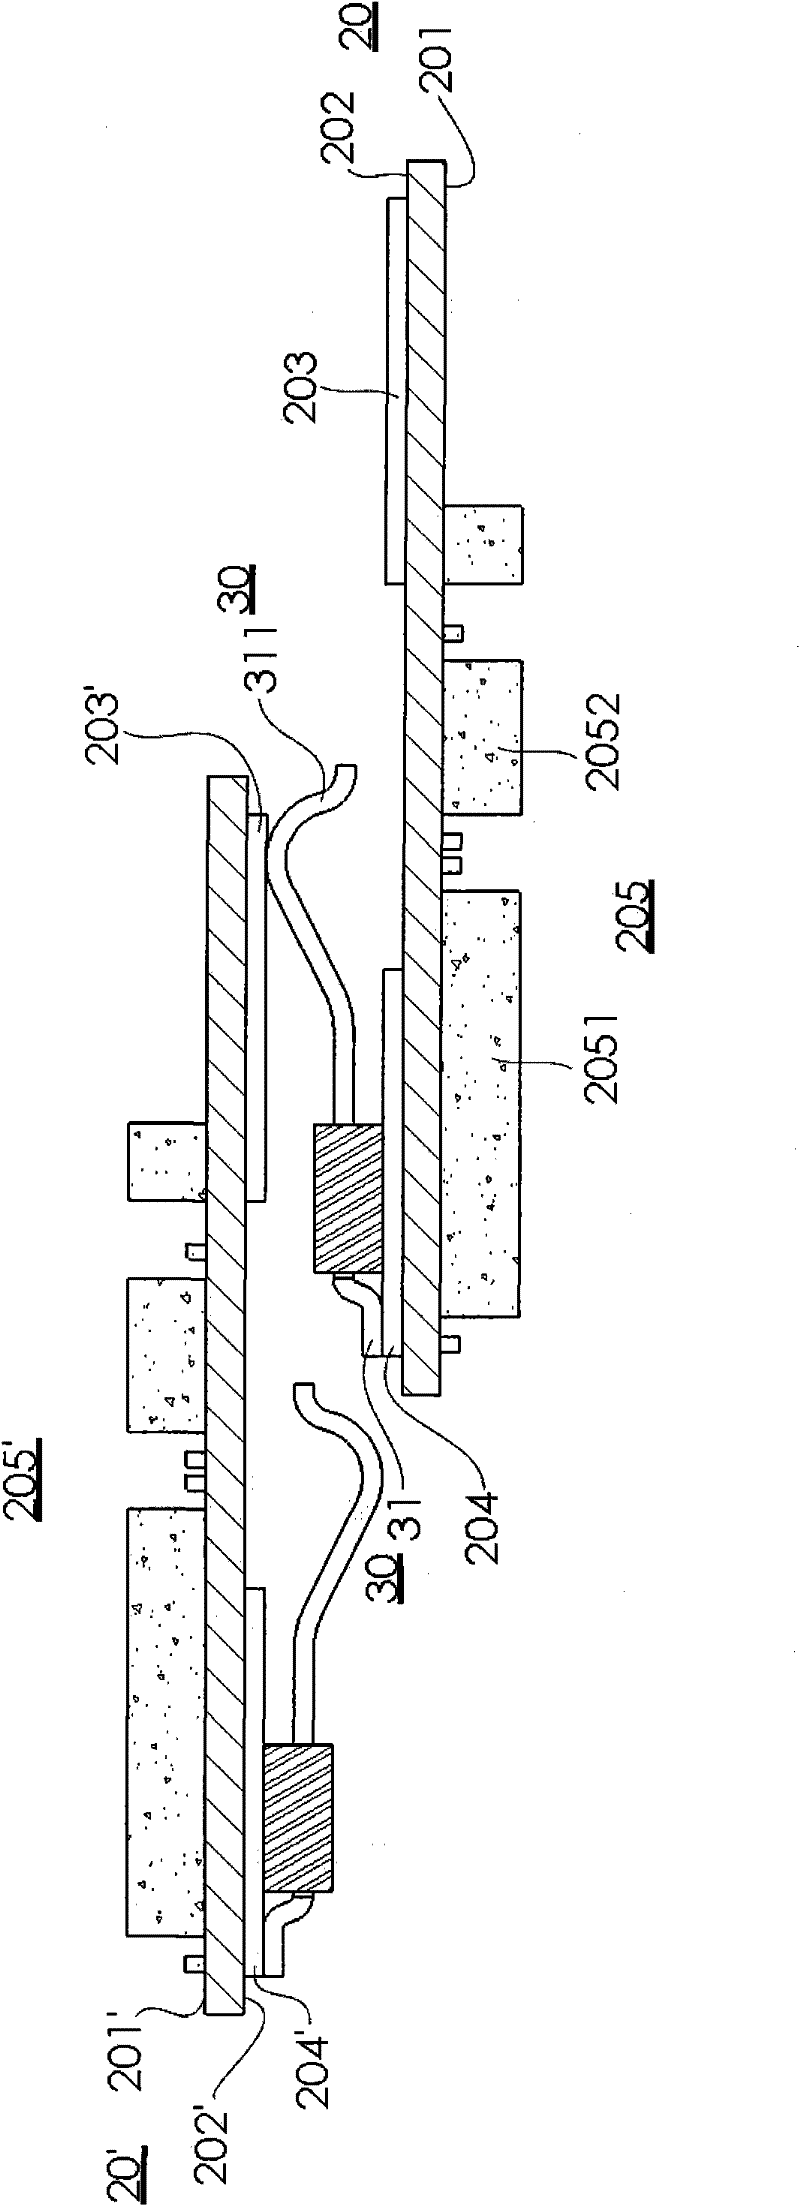 High density integrated circuit module structure